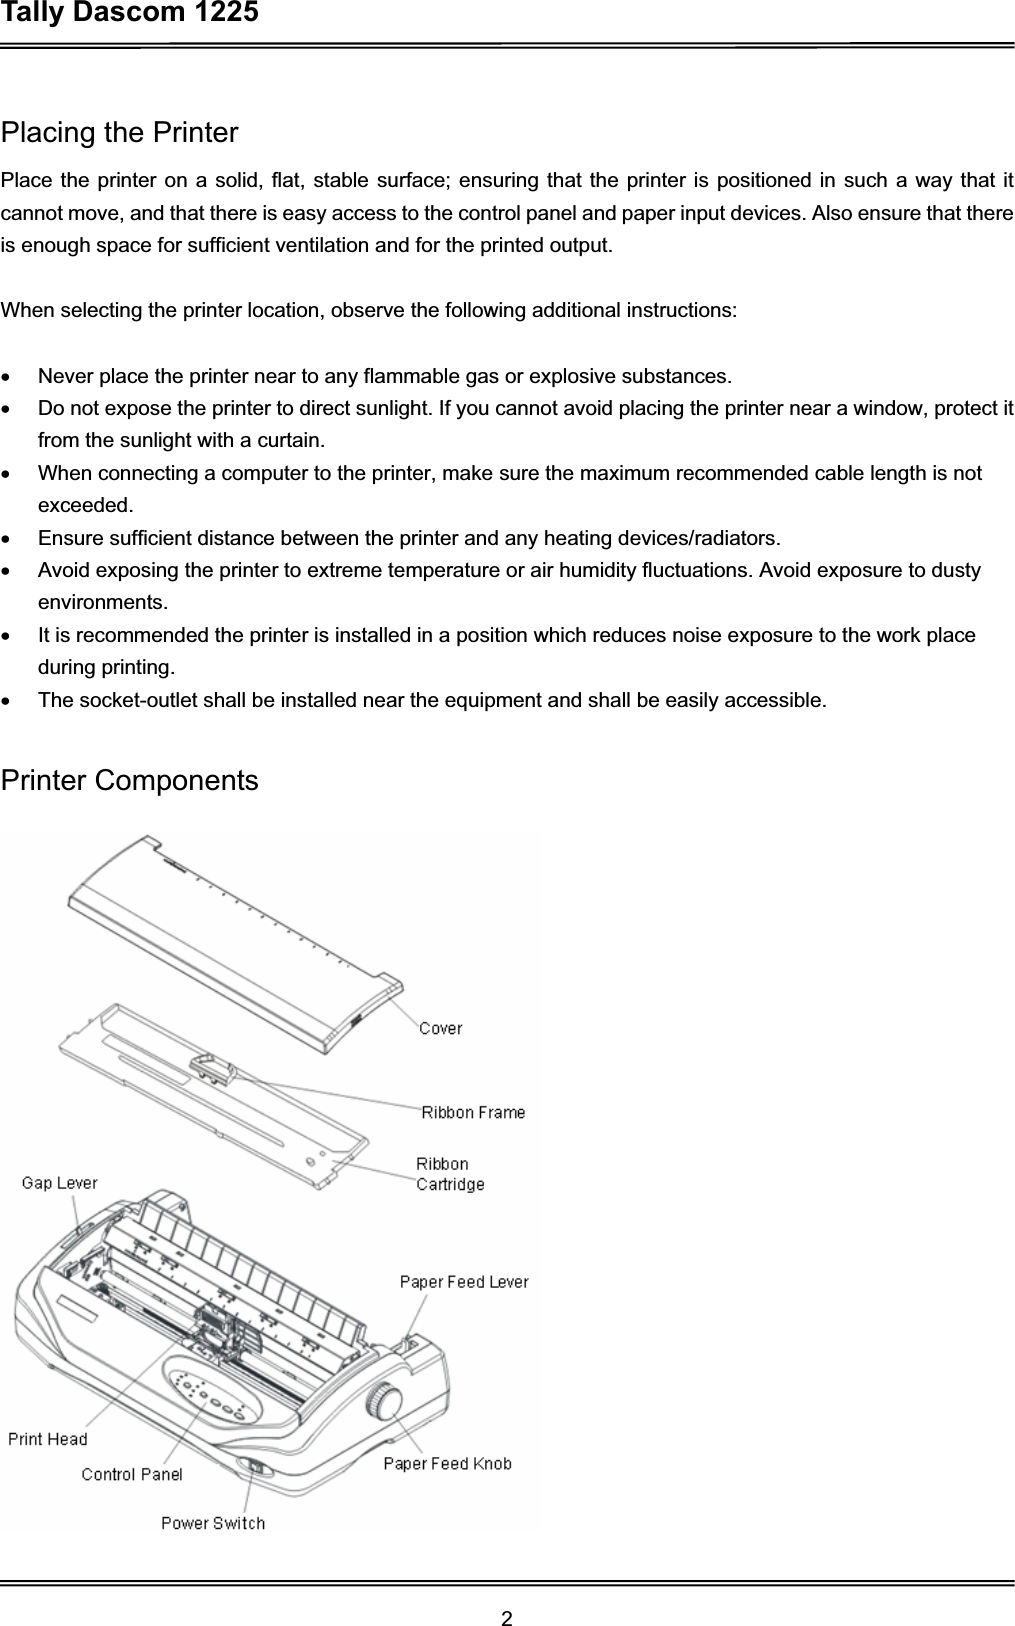 Tally Dascom 1225 2Placing the Printer Place the printer on a solid, flat, stable surface; ensuring that the printer is positioned in such a way that it cannot move, and that there is easy access to the control panel and paper input devices. Also ensure that there is enough space for sufficient ventilation and for the printed output. When selecting the printer location, observe the following additional instructions: x  Never place the printer near to any flammable gas or explosive substances. x  Do not expose the printer to direct sunlight. If you cannot avoid placing the printer near a window, protect it from the sunlight with a curtain. x  When connecting a computer to the printer, make sure the maximum recommended cable length is not exceeded. x  Ensure sufficient distance between the printer and any heating devices/radiators. x  Avoid exposing the printer to extreme temperature or air humidity fluctuations. Avoid exposure to dusty environments. x  It is recommended the printer is installed in a position which reduces noise exposure to the work place during printing.   x  The socket-outlet shall be installed near the equipment and shall be easily accessible.   Printer Components 